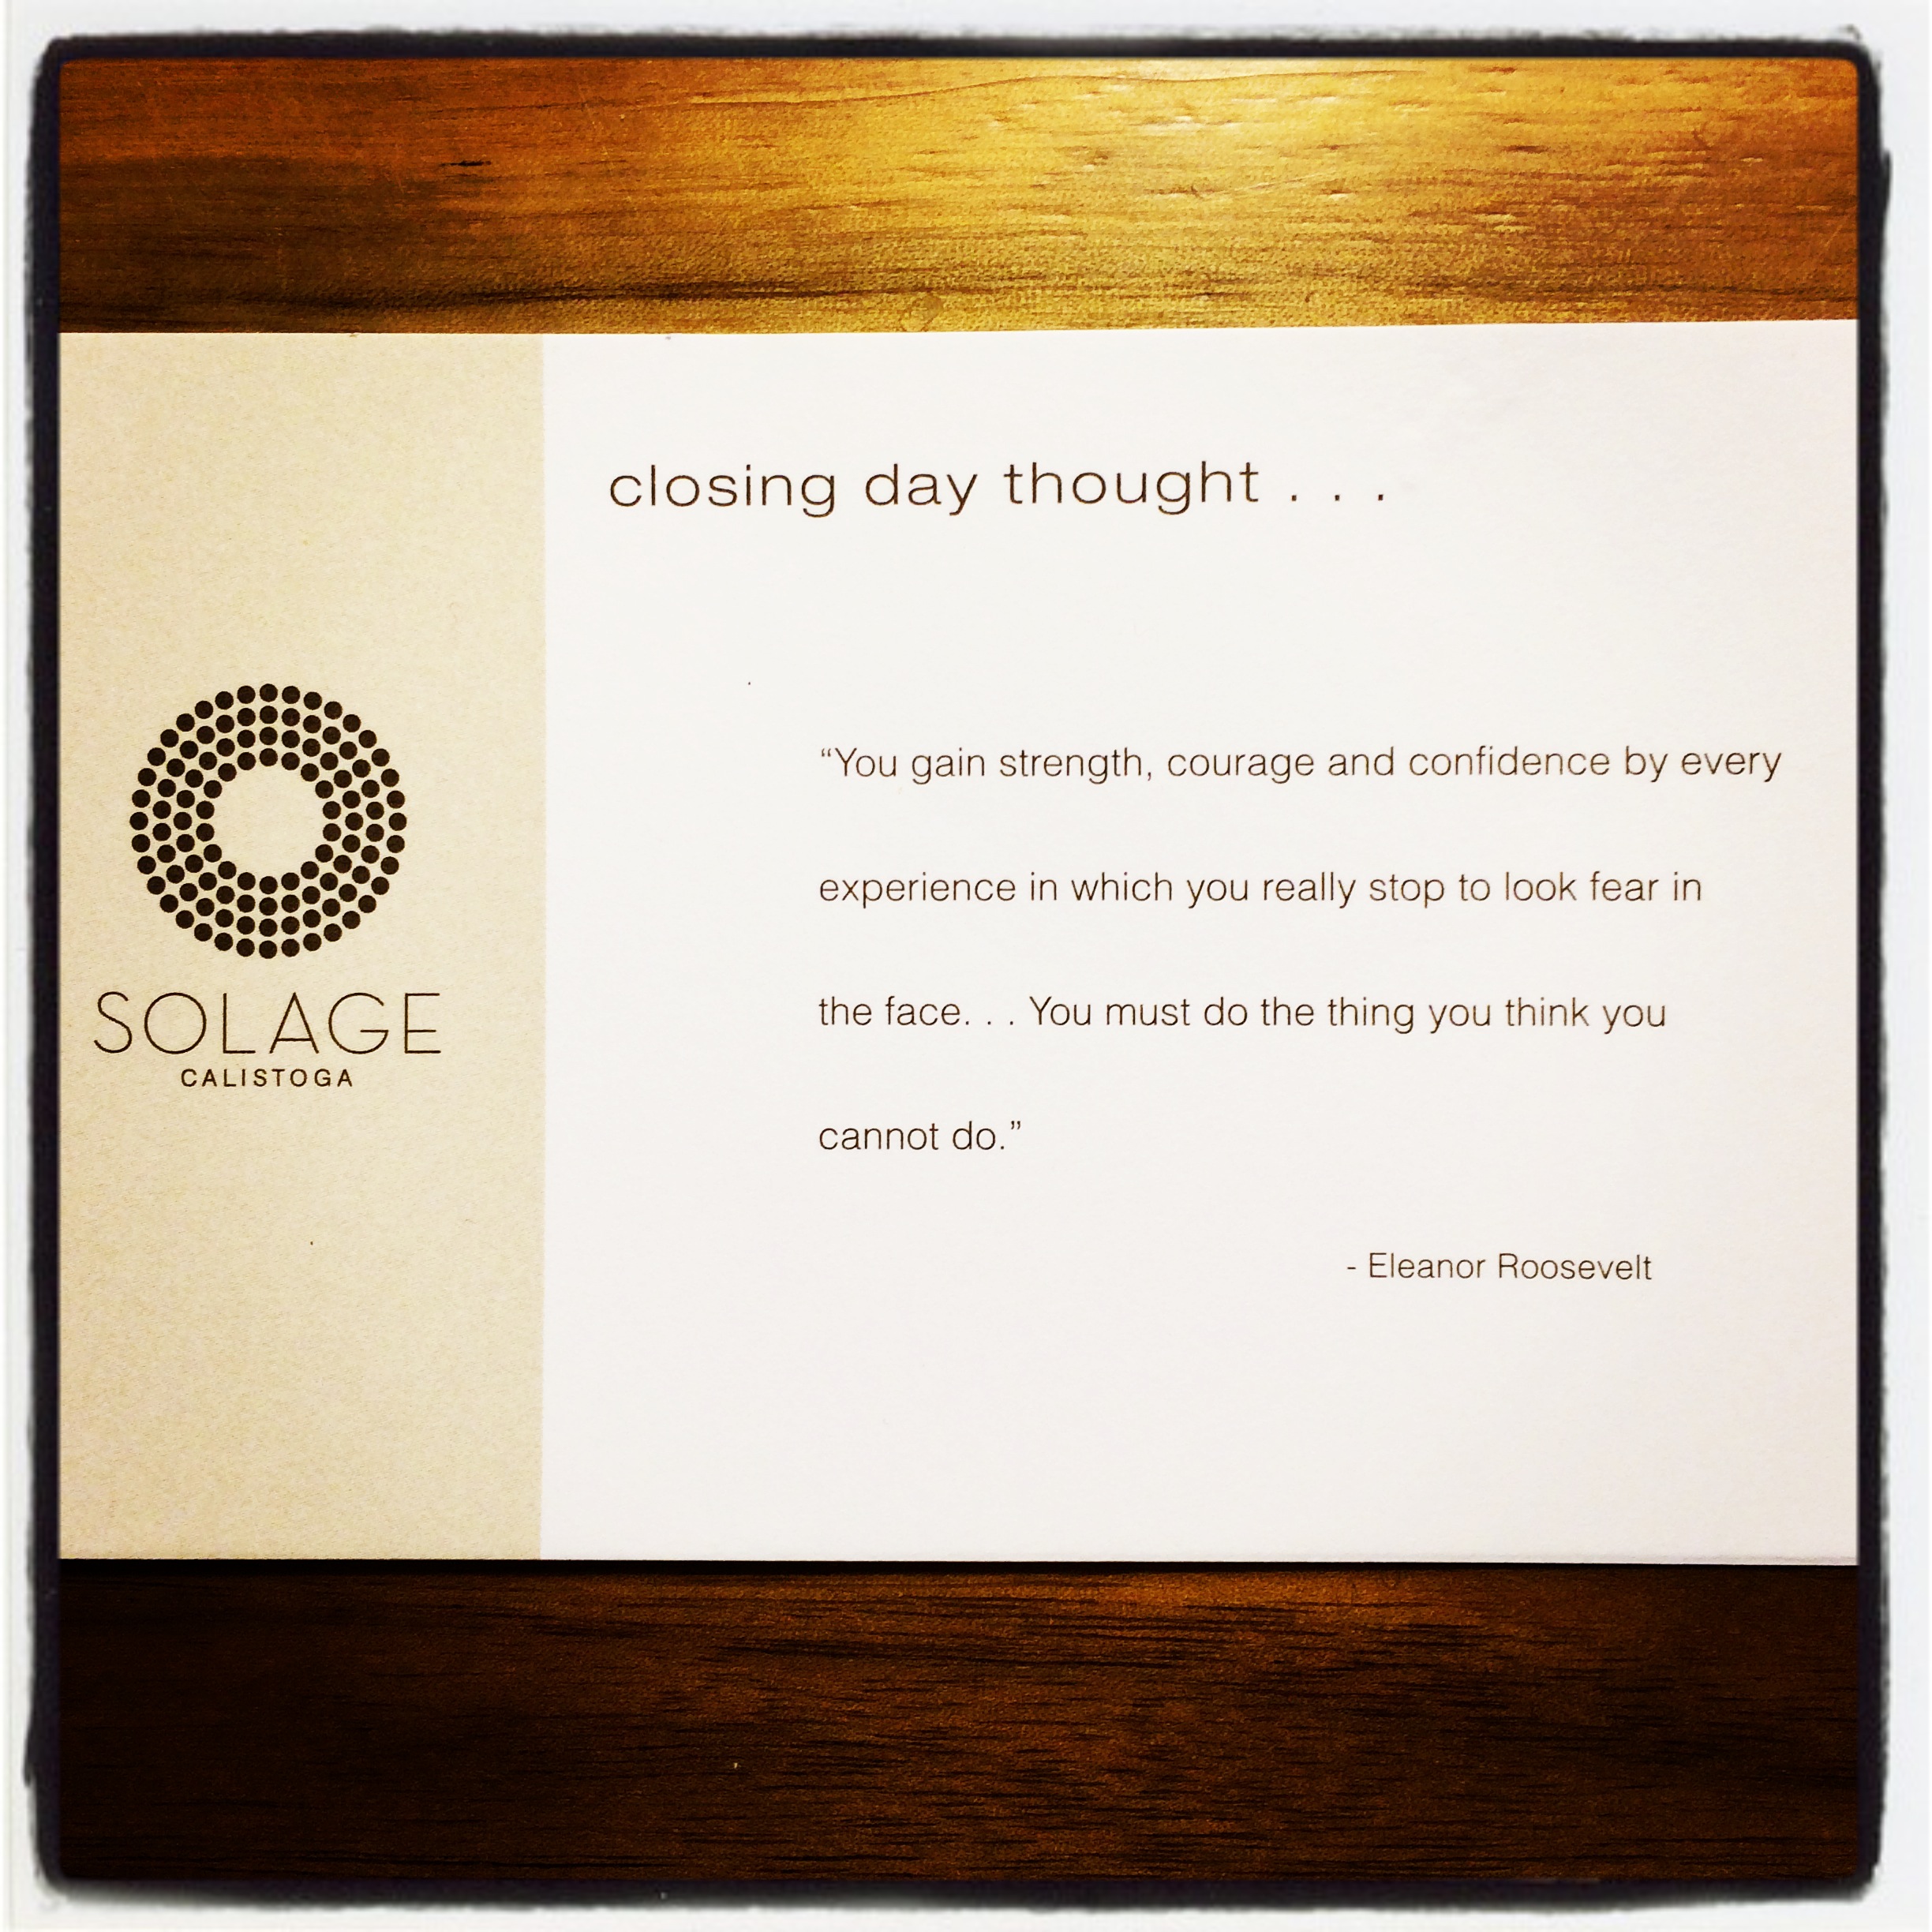 Inspiring closing day thoughts from Solage Resort